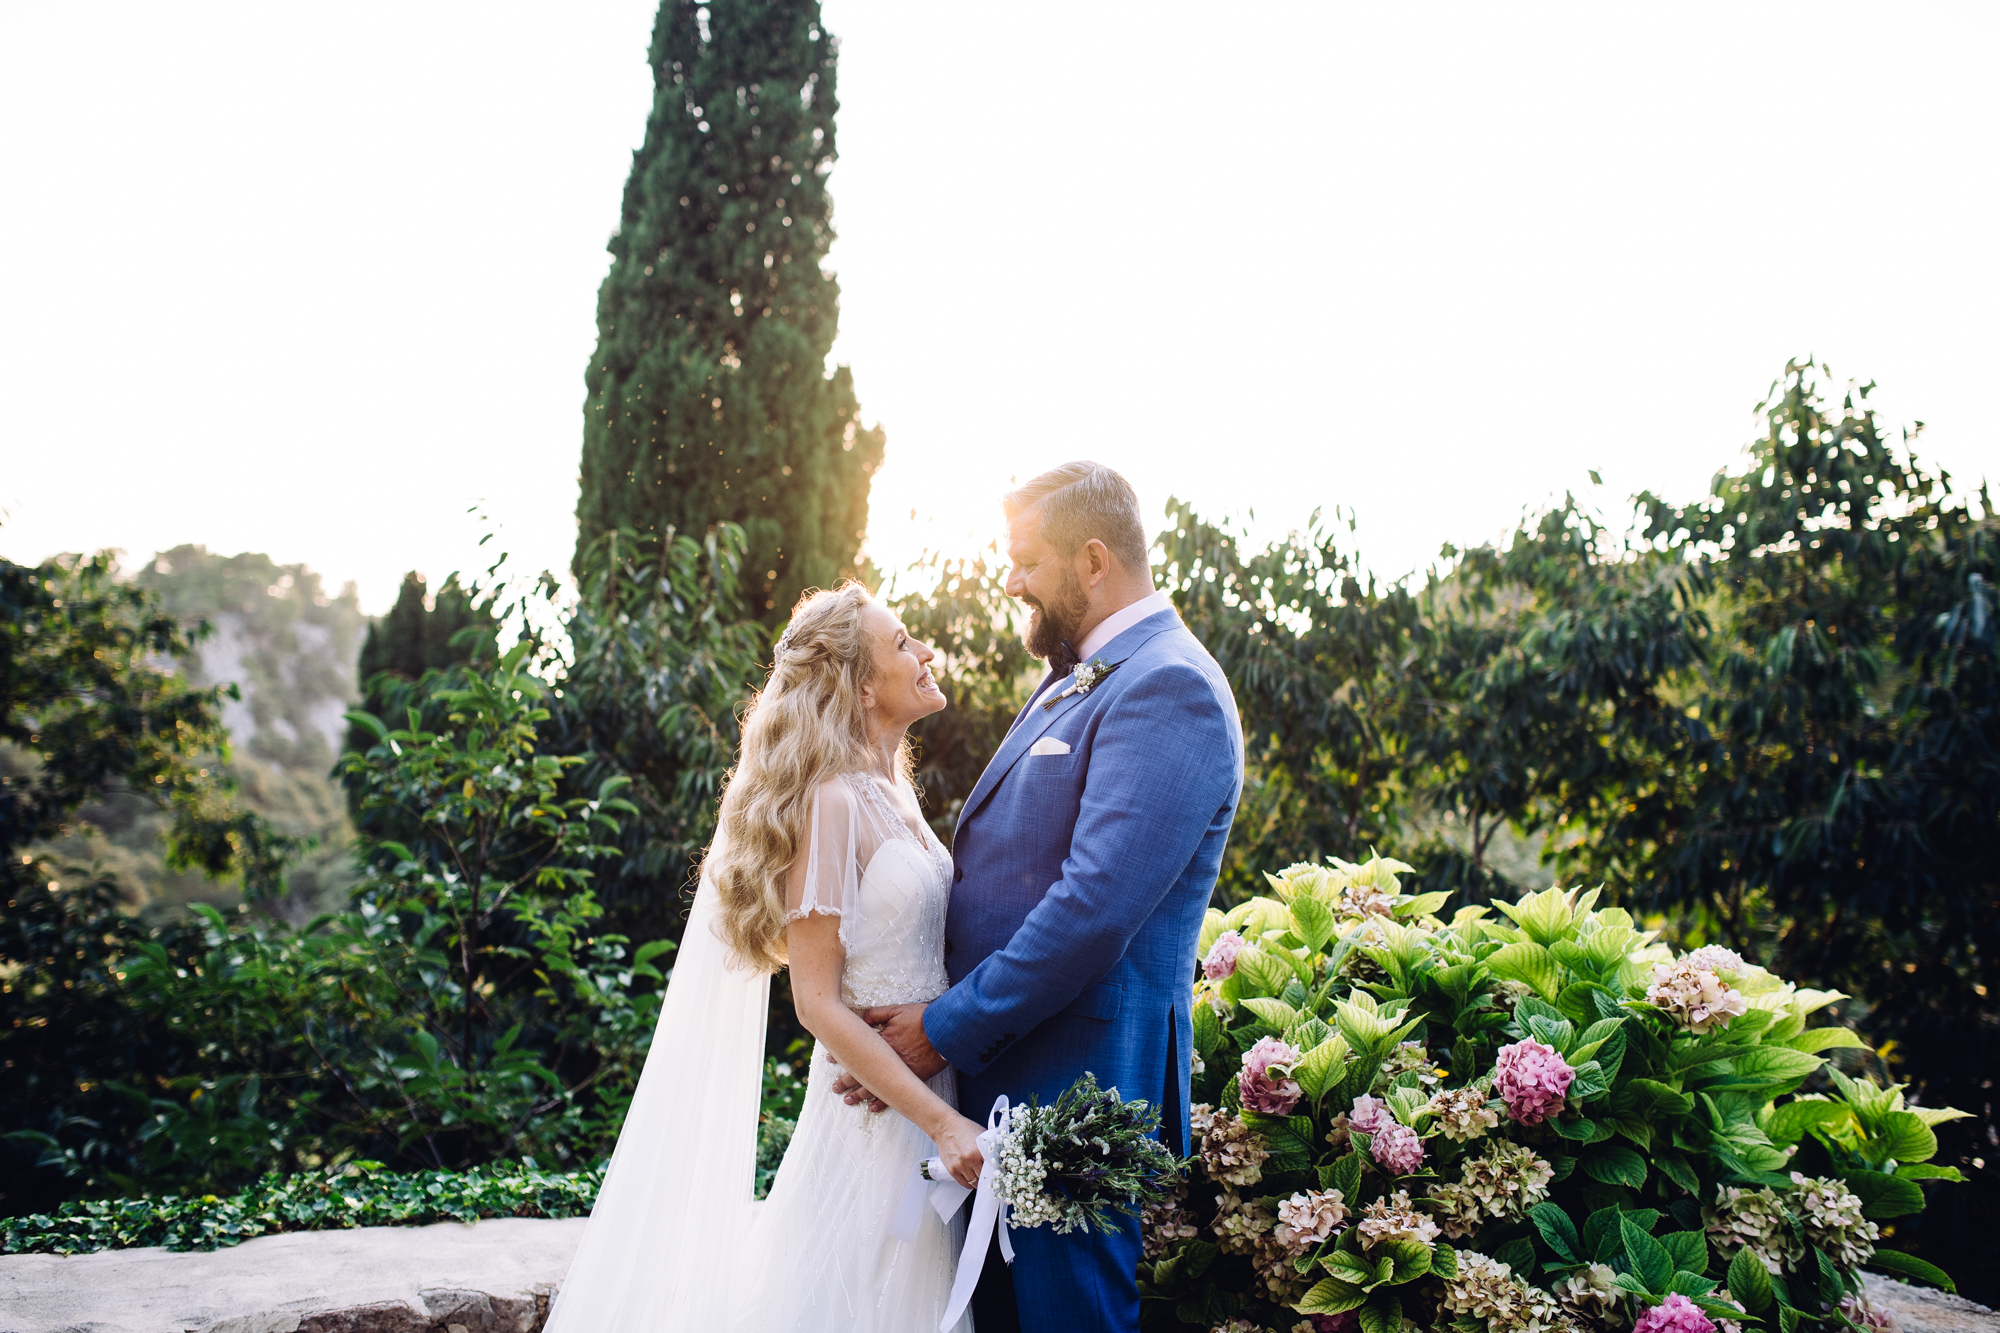 Rosa Clara For A Sophisticated Elegant Woodland Wedding In Mallorca With Lots Of Fairylights Love My Dress Uk Wedding Blog Wedding Directory